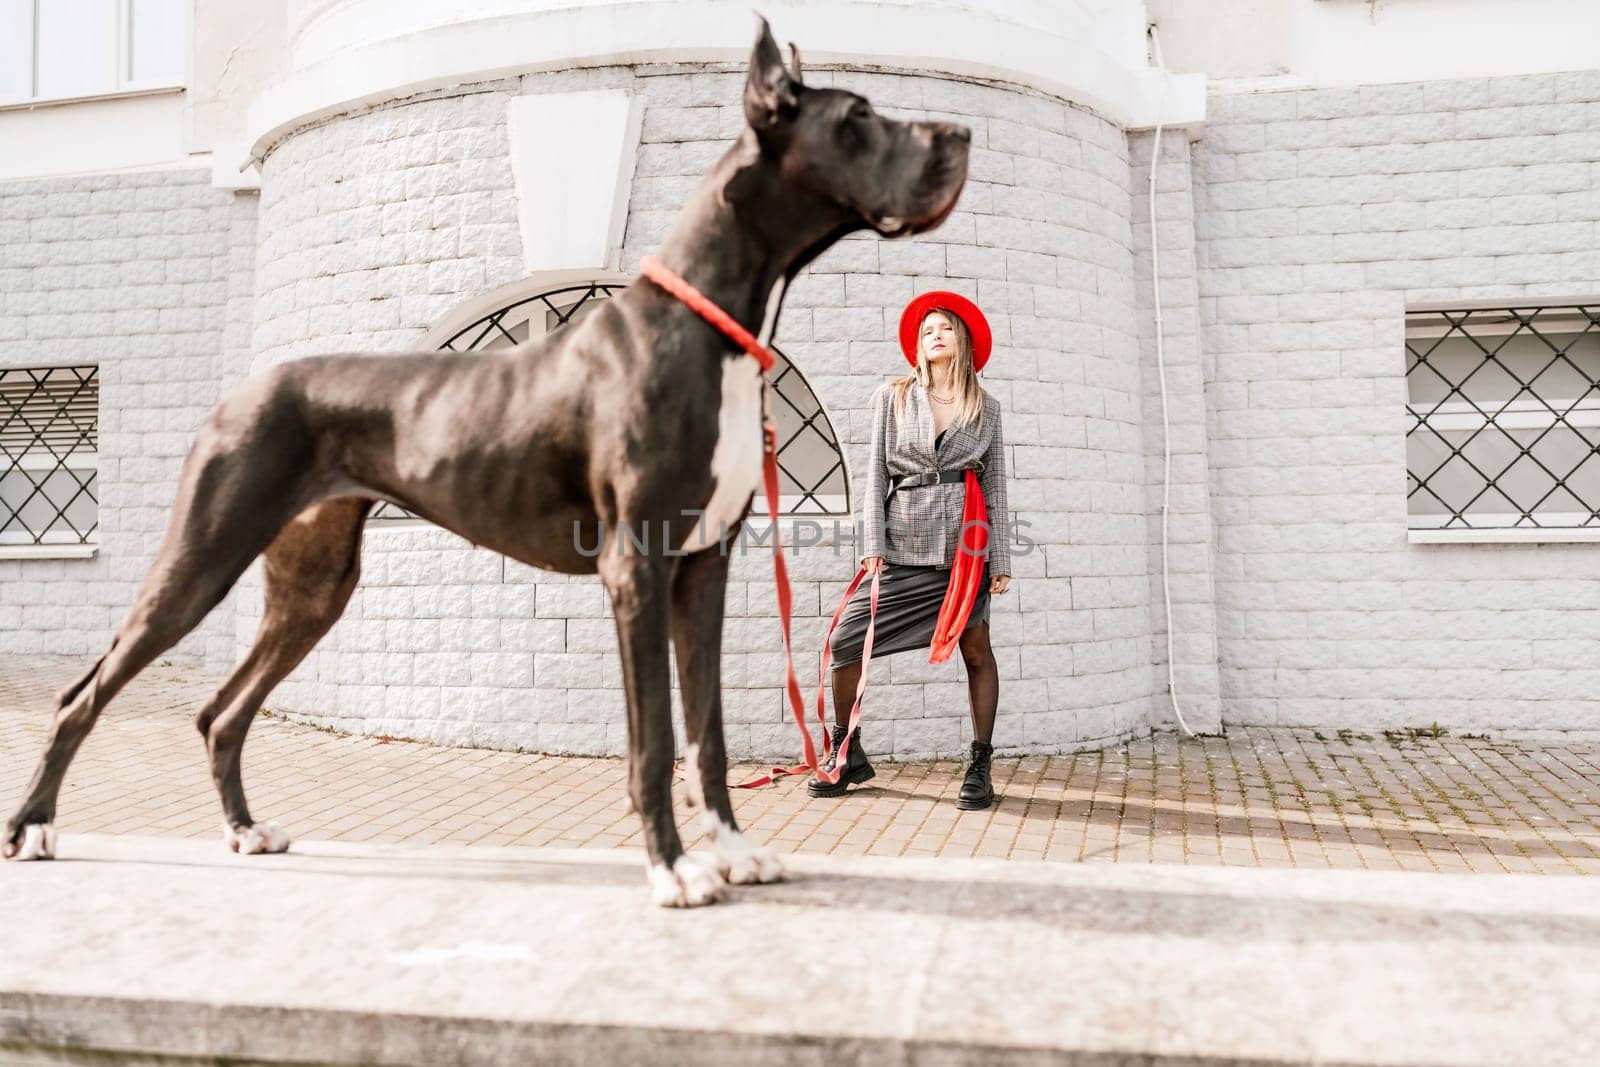 A photo of a woman and her Great Dane walking through a town, taking in the sights and sounds of the urban environment. by Matiunina